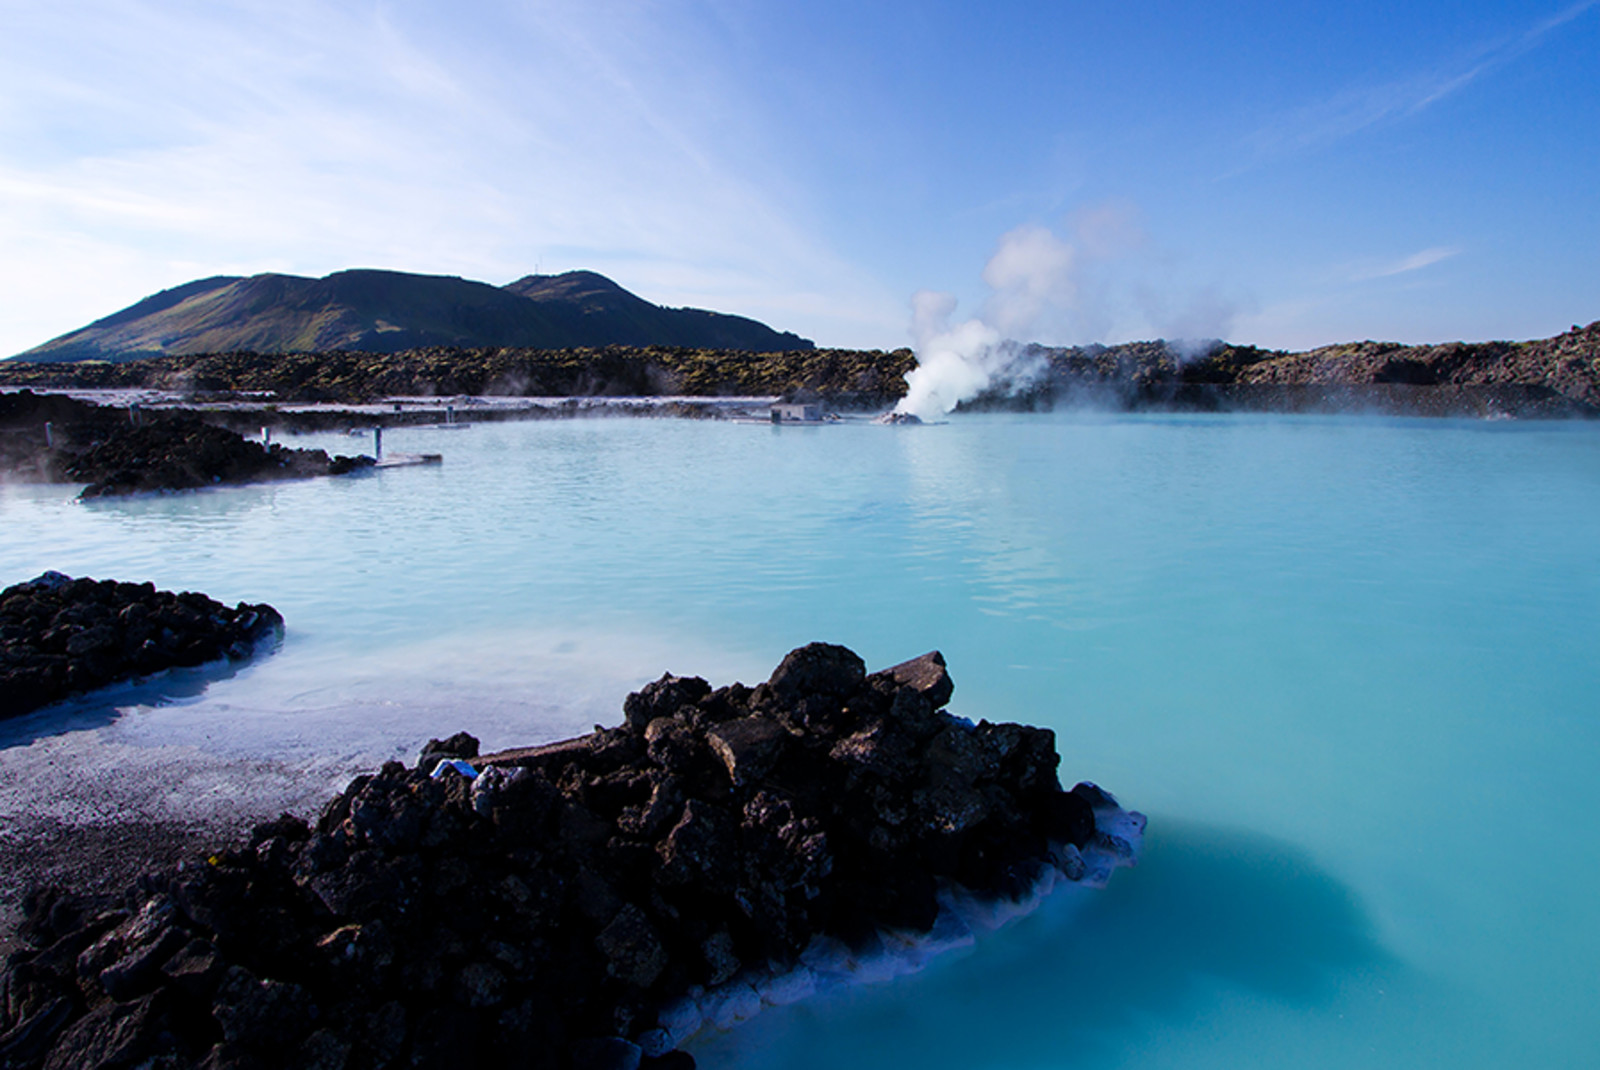 5-Day Itinerary to Explore Iceland’s Natural Beauty - Day 5: Relax at Blue Lagoon